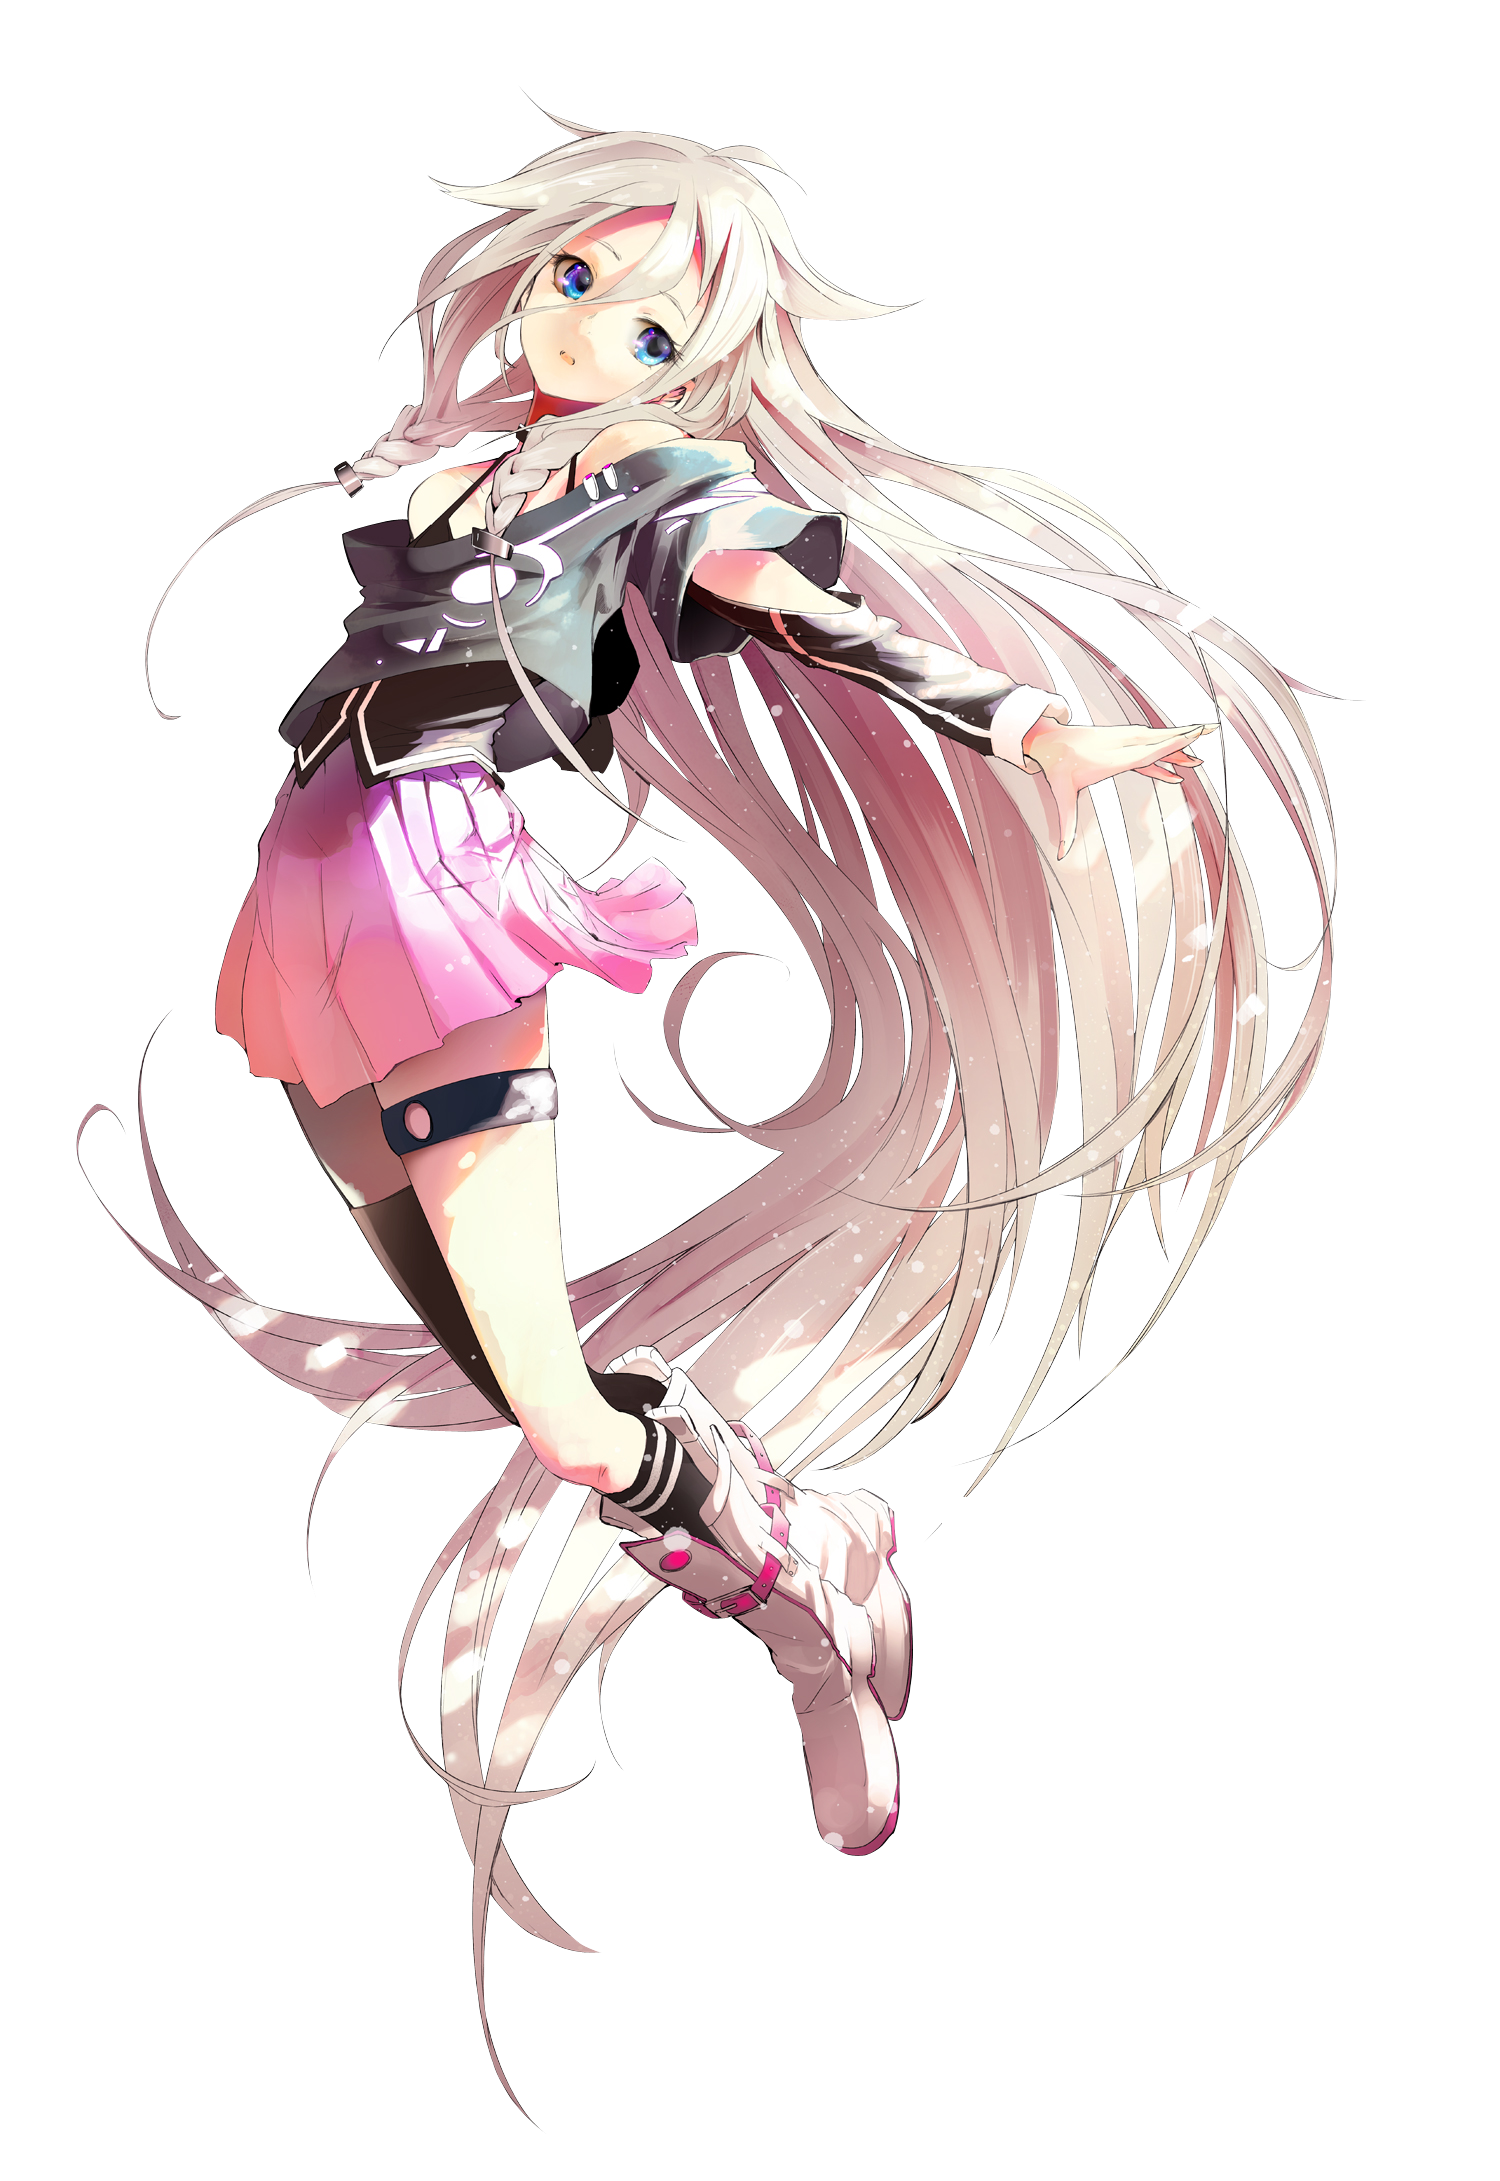 ia is the worst vocaloid